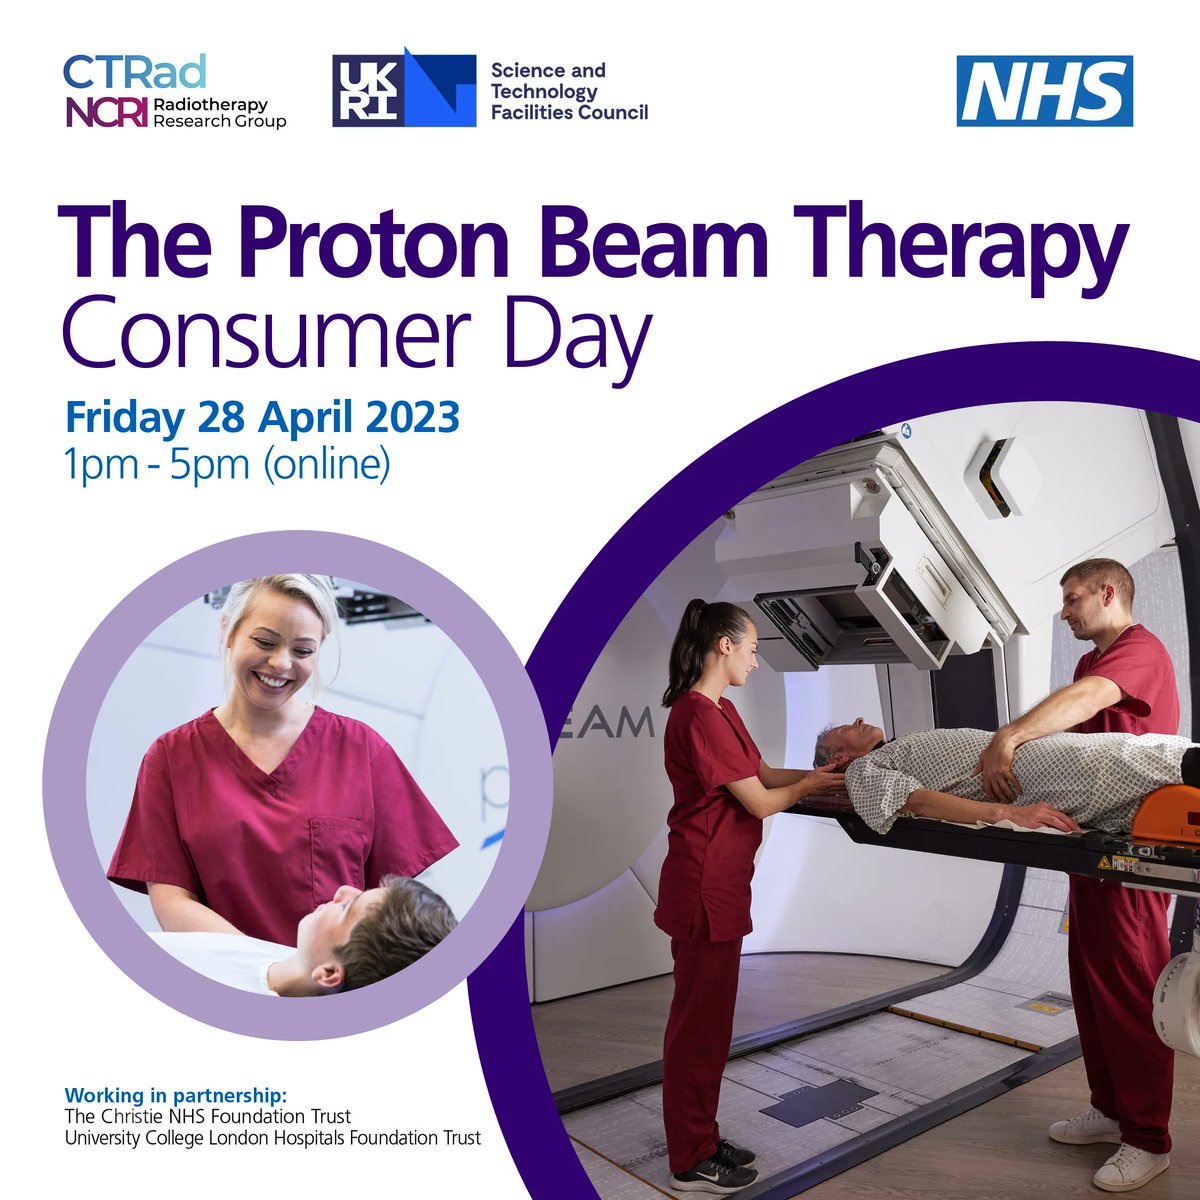 Want to learn more about #ProtonBeamTherapy at UCLH? Join our UCLH and @TheChristieNHS online event on Friday 28 April, 1pm-5pm and hear from experts and patients about this advanced form of #radiotherapy. All are welcome to attend - register today: buff.ly/3GEbmEU